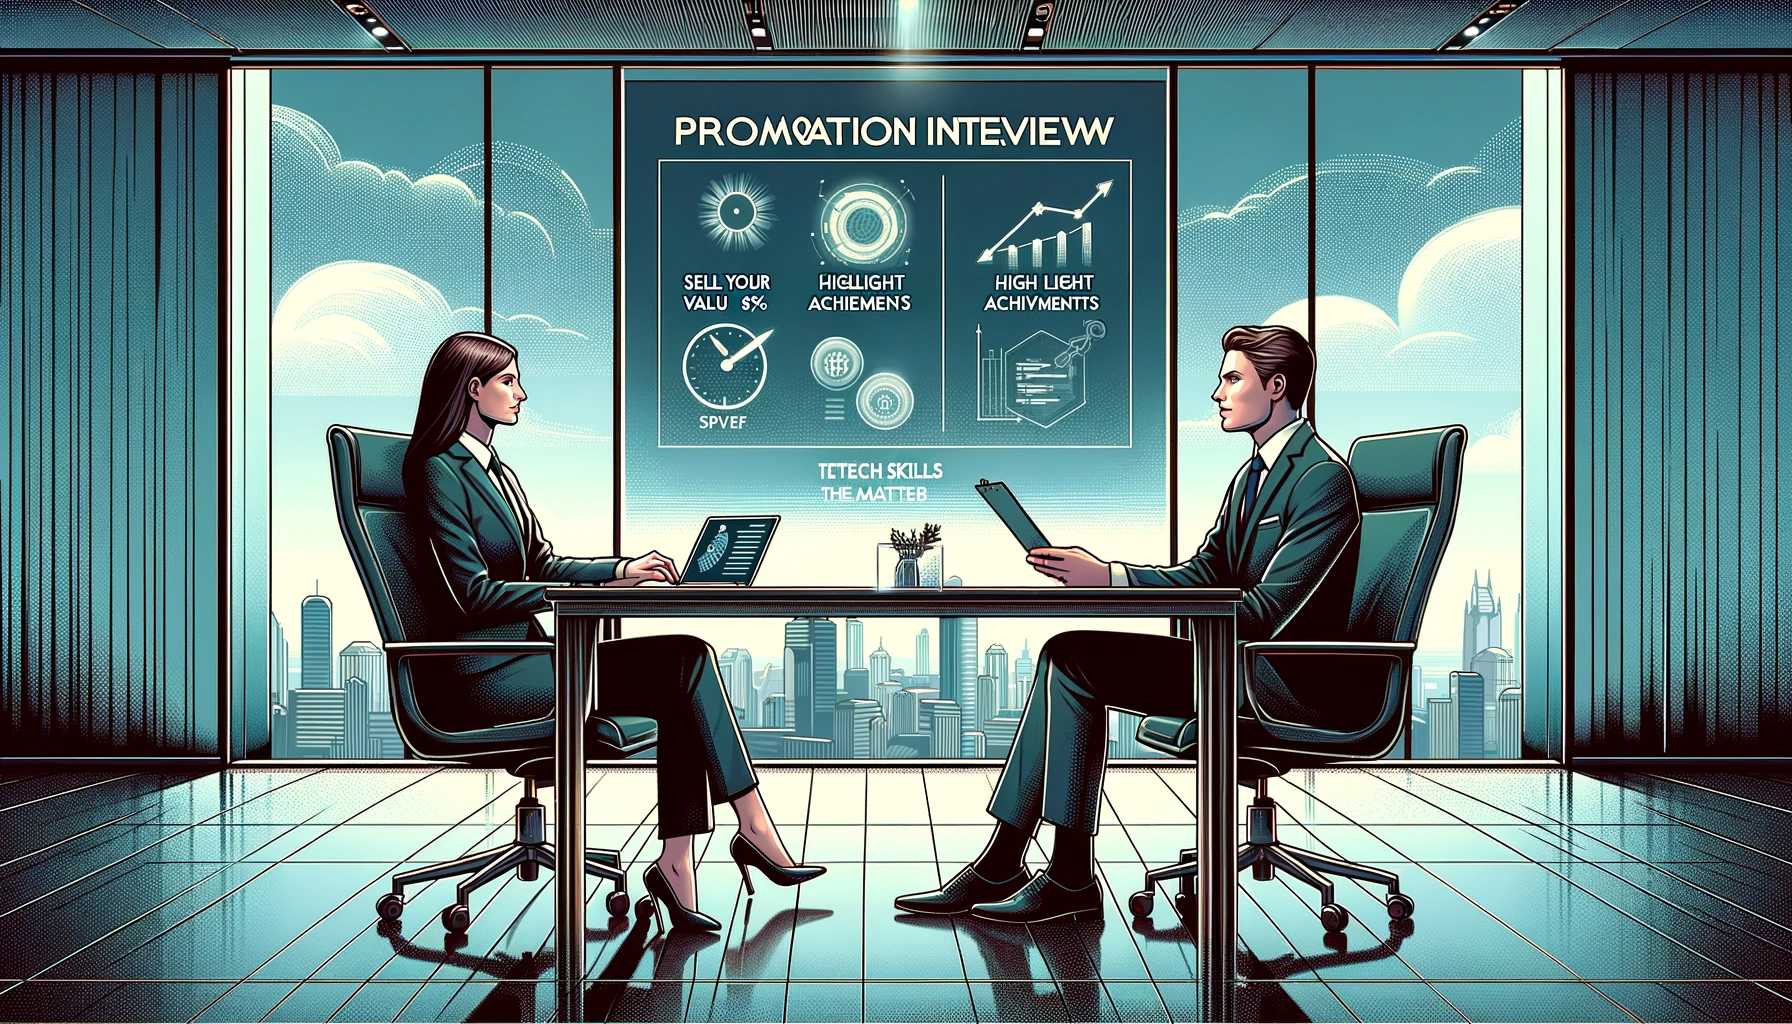 Promotion interview tips for tech: How to sell your value